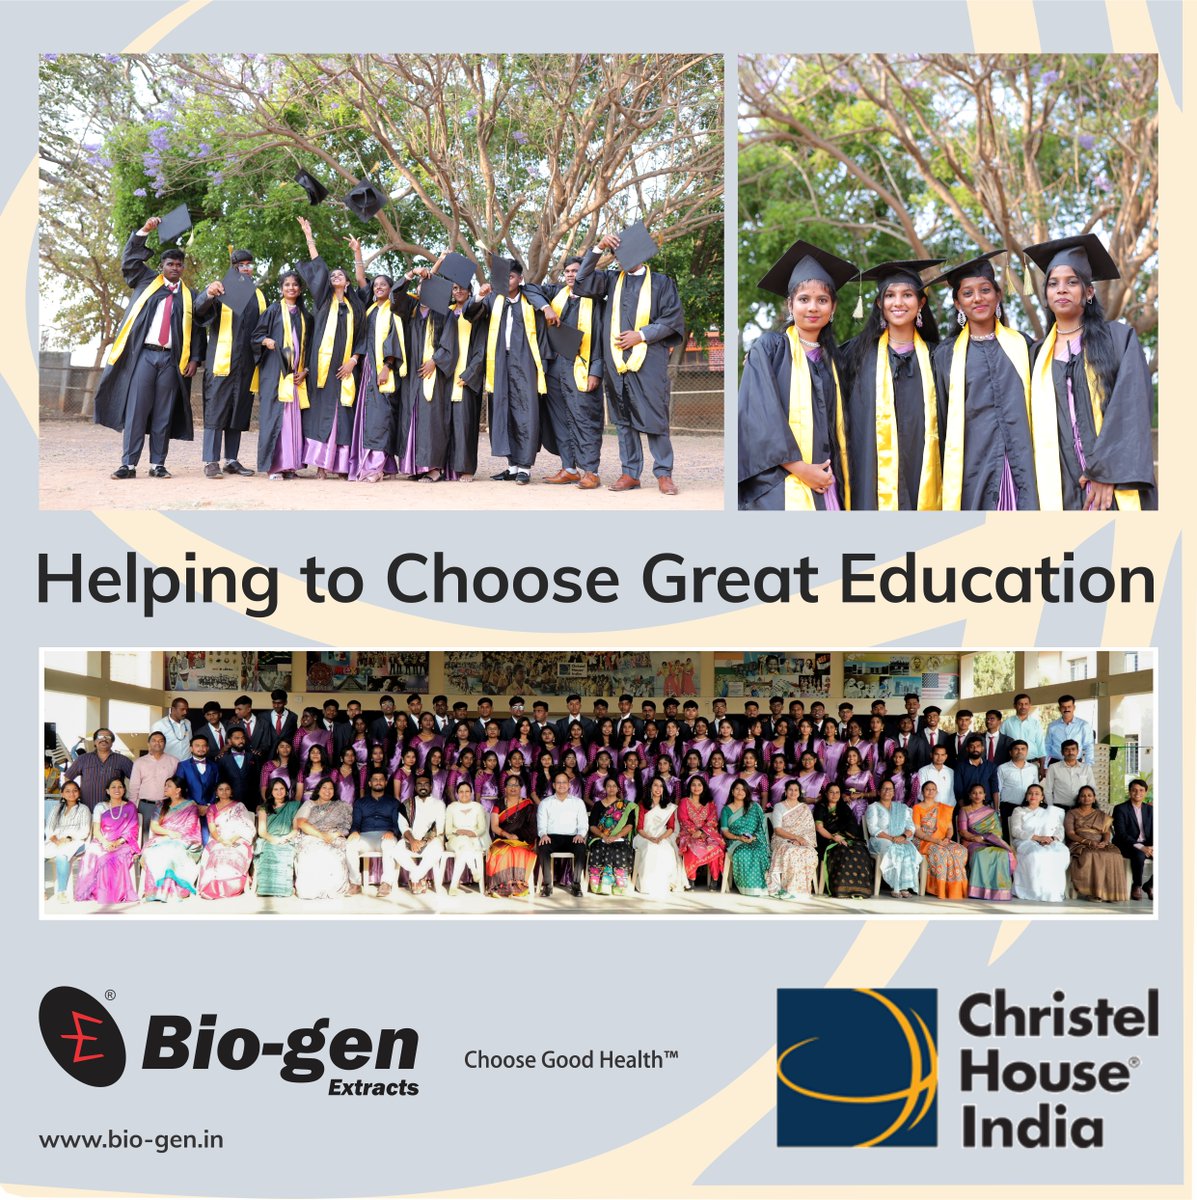 Congratulating Christel House India, for their amazing performance!

100% pass rate! 
71% students secured ‘Distinction’!
29% clinched ‘First Class’ honors!

Let us forge a brighter future for generations to come.

#biogenextracts
#christelhouseindia